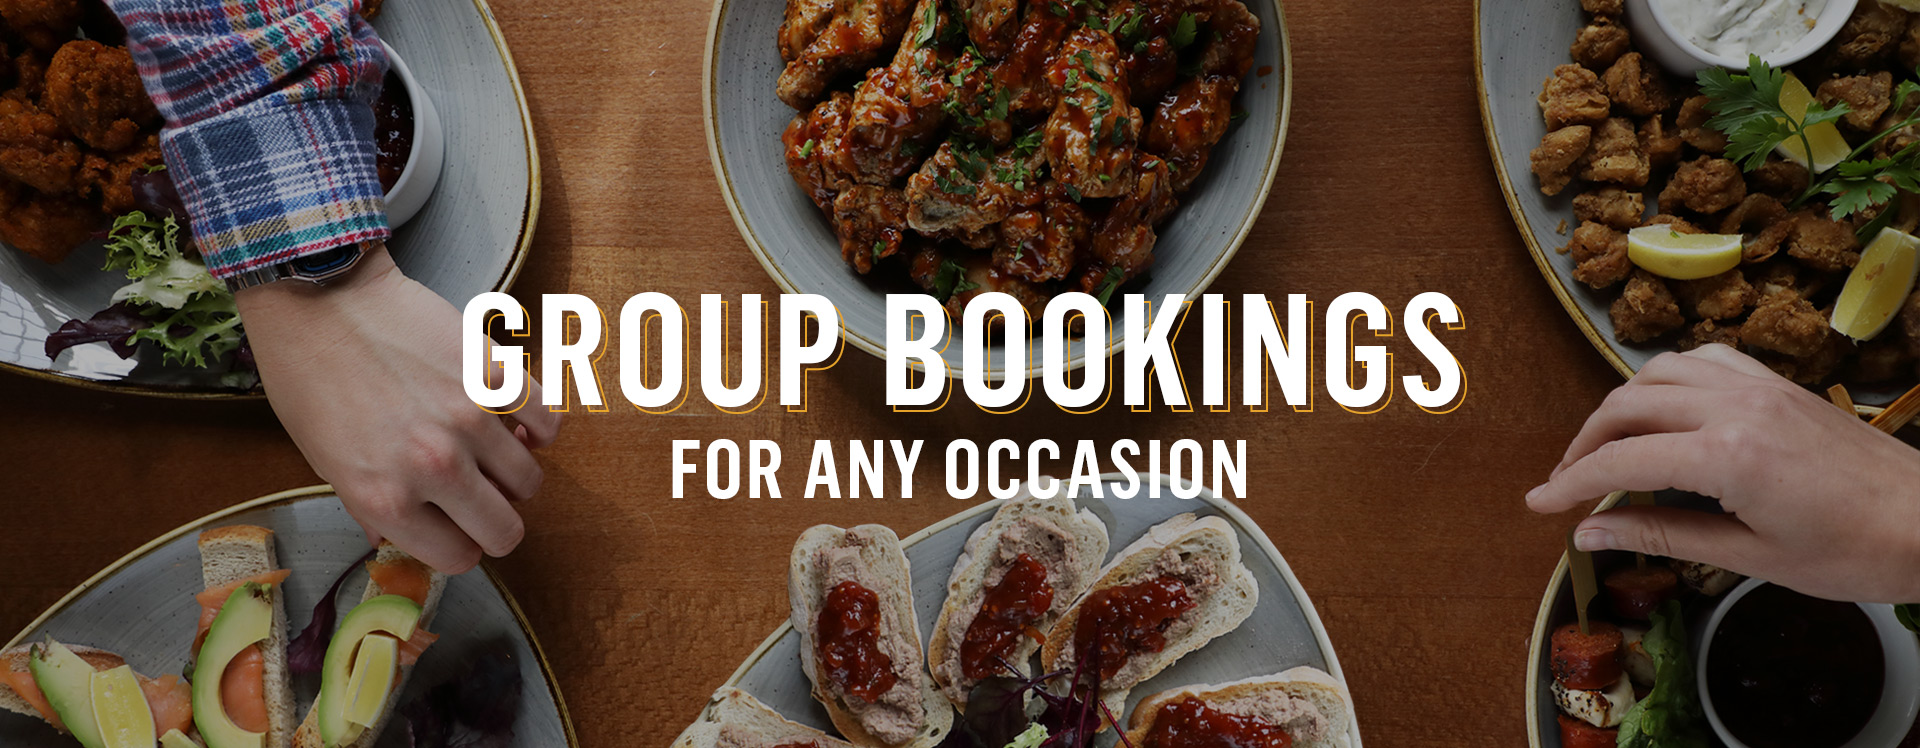 Group Bookings at The Chequers